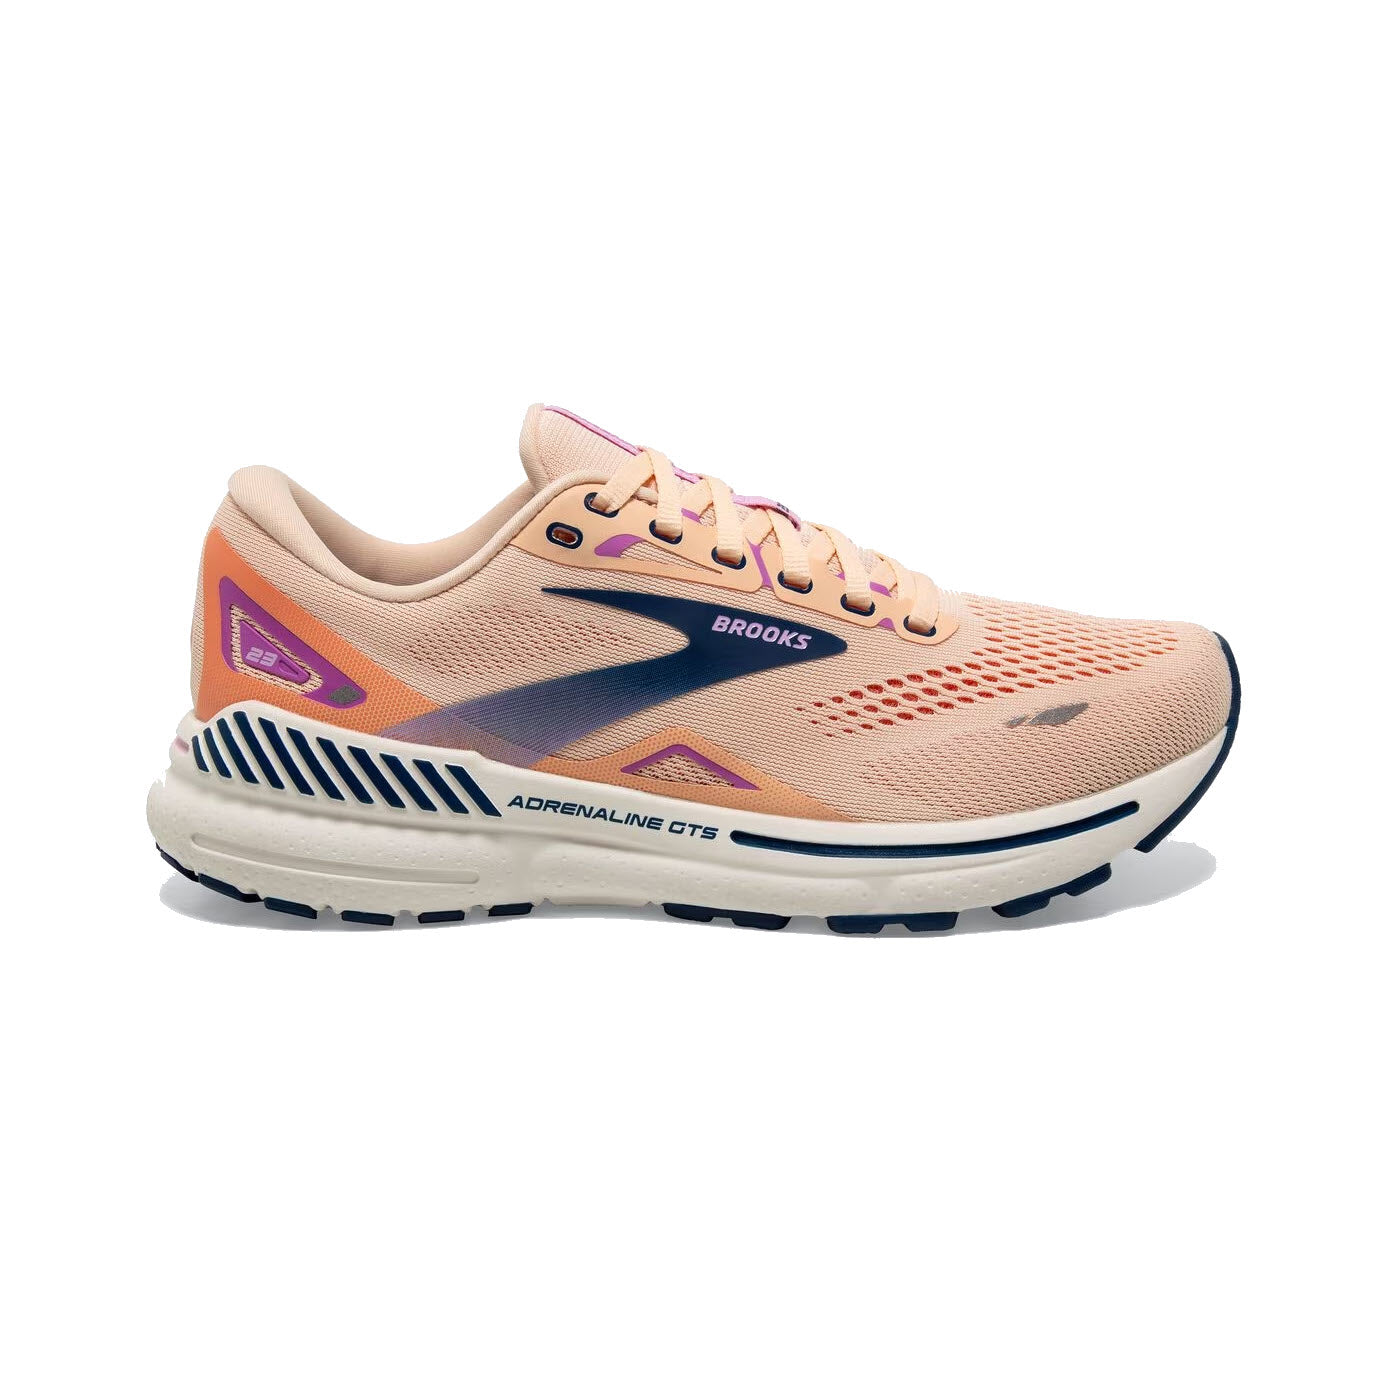 A single apricot and blue-colored women's Brooks Adrenaline GTS 23 stability running shoe against a white background.